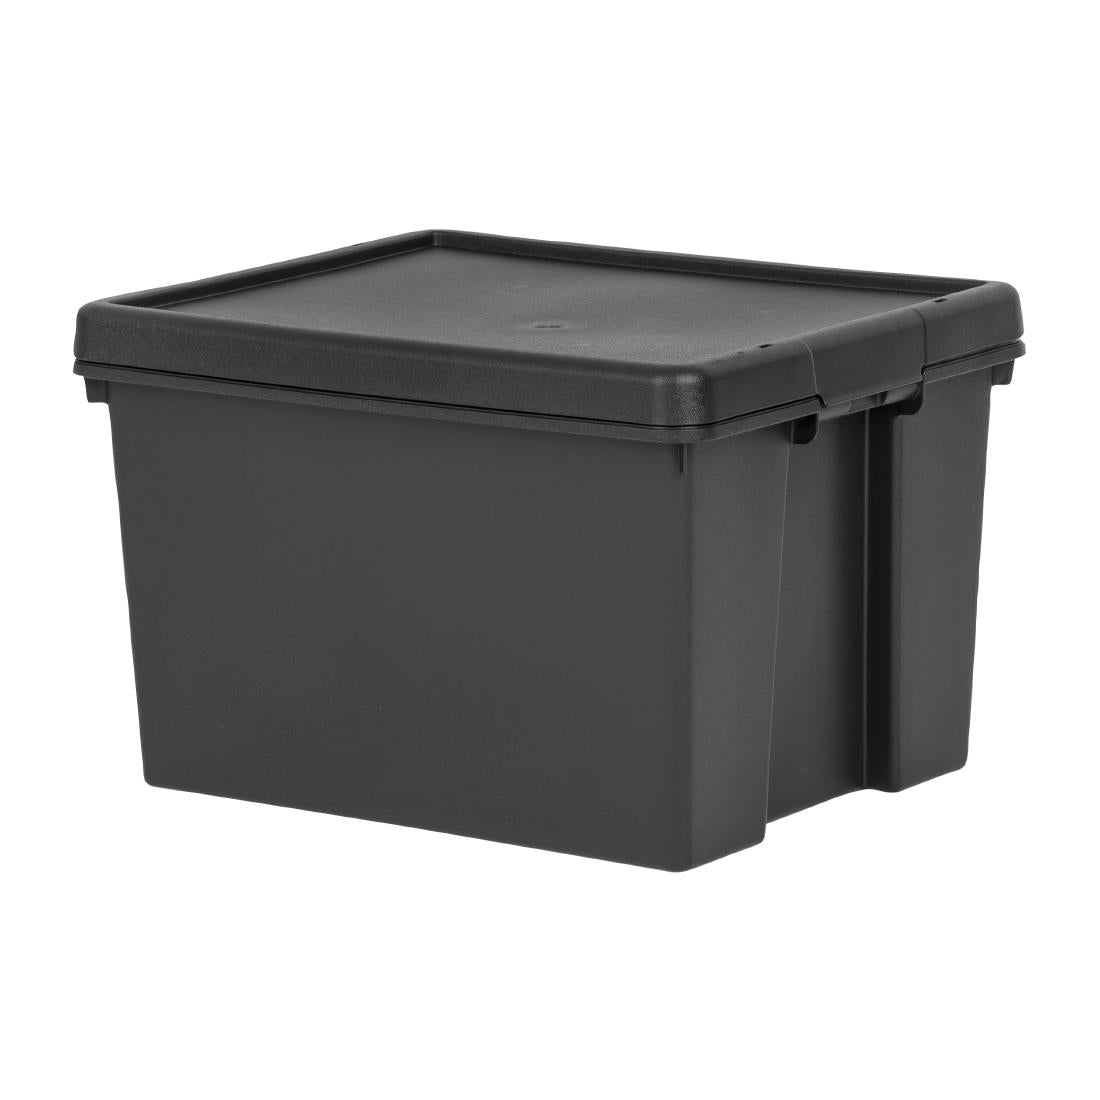 CX093 Wham Bam Recycled Storage Box & Lid Black 45Ltr JD Catering Equipment Solutions Ltd